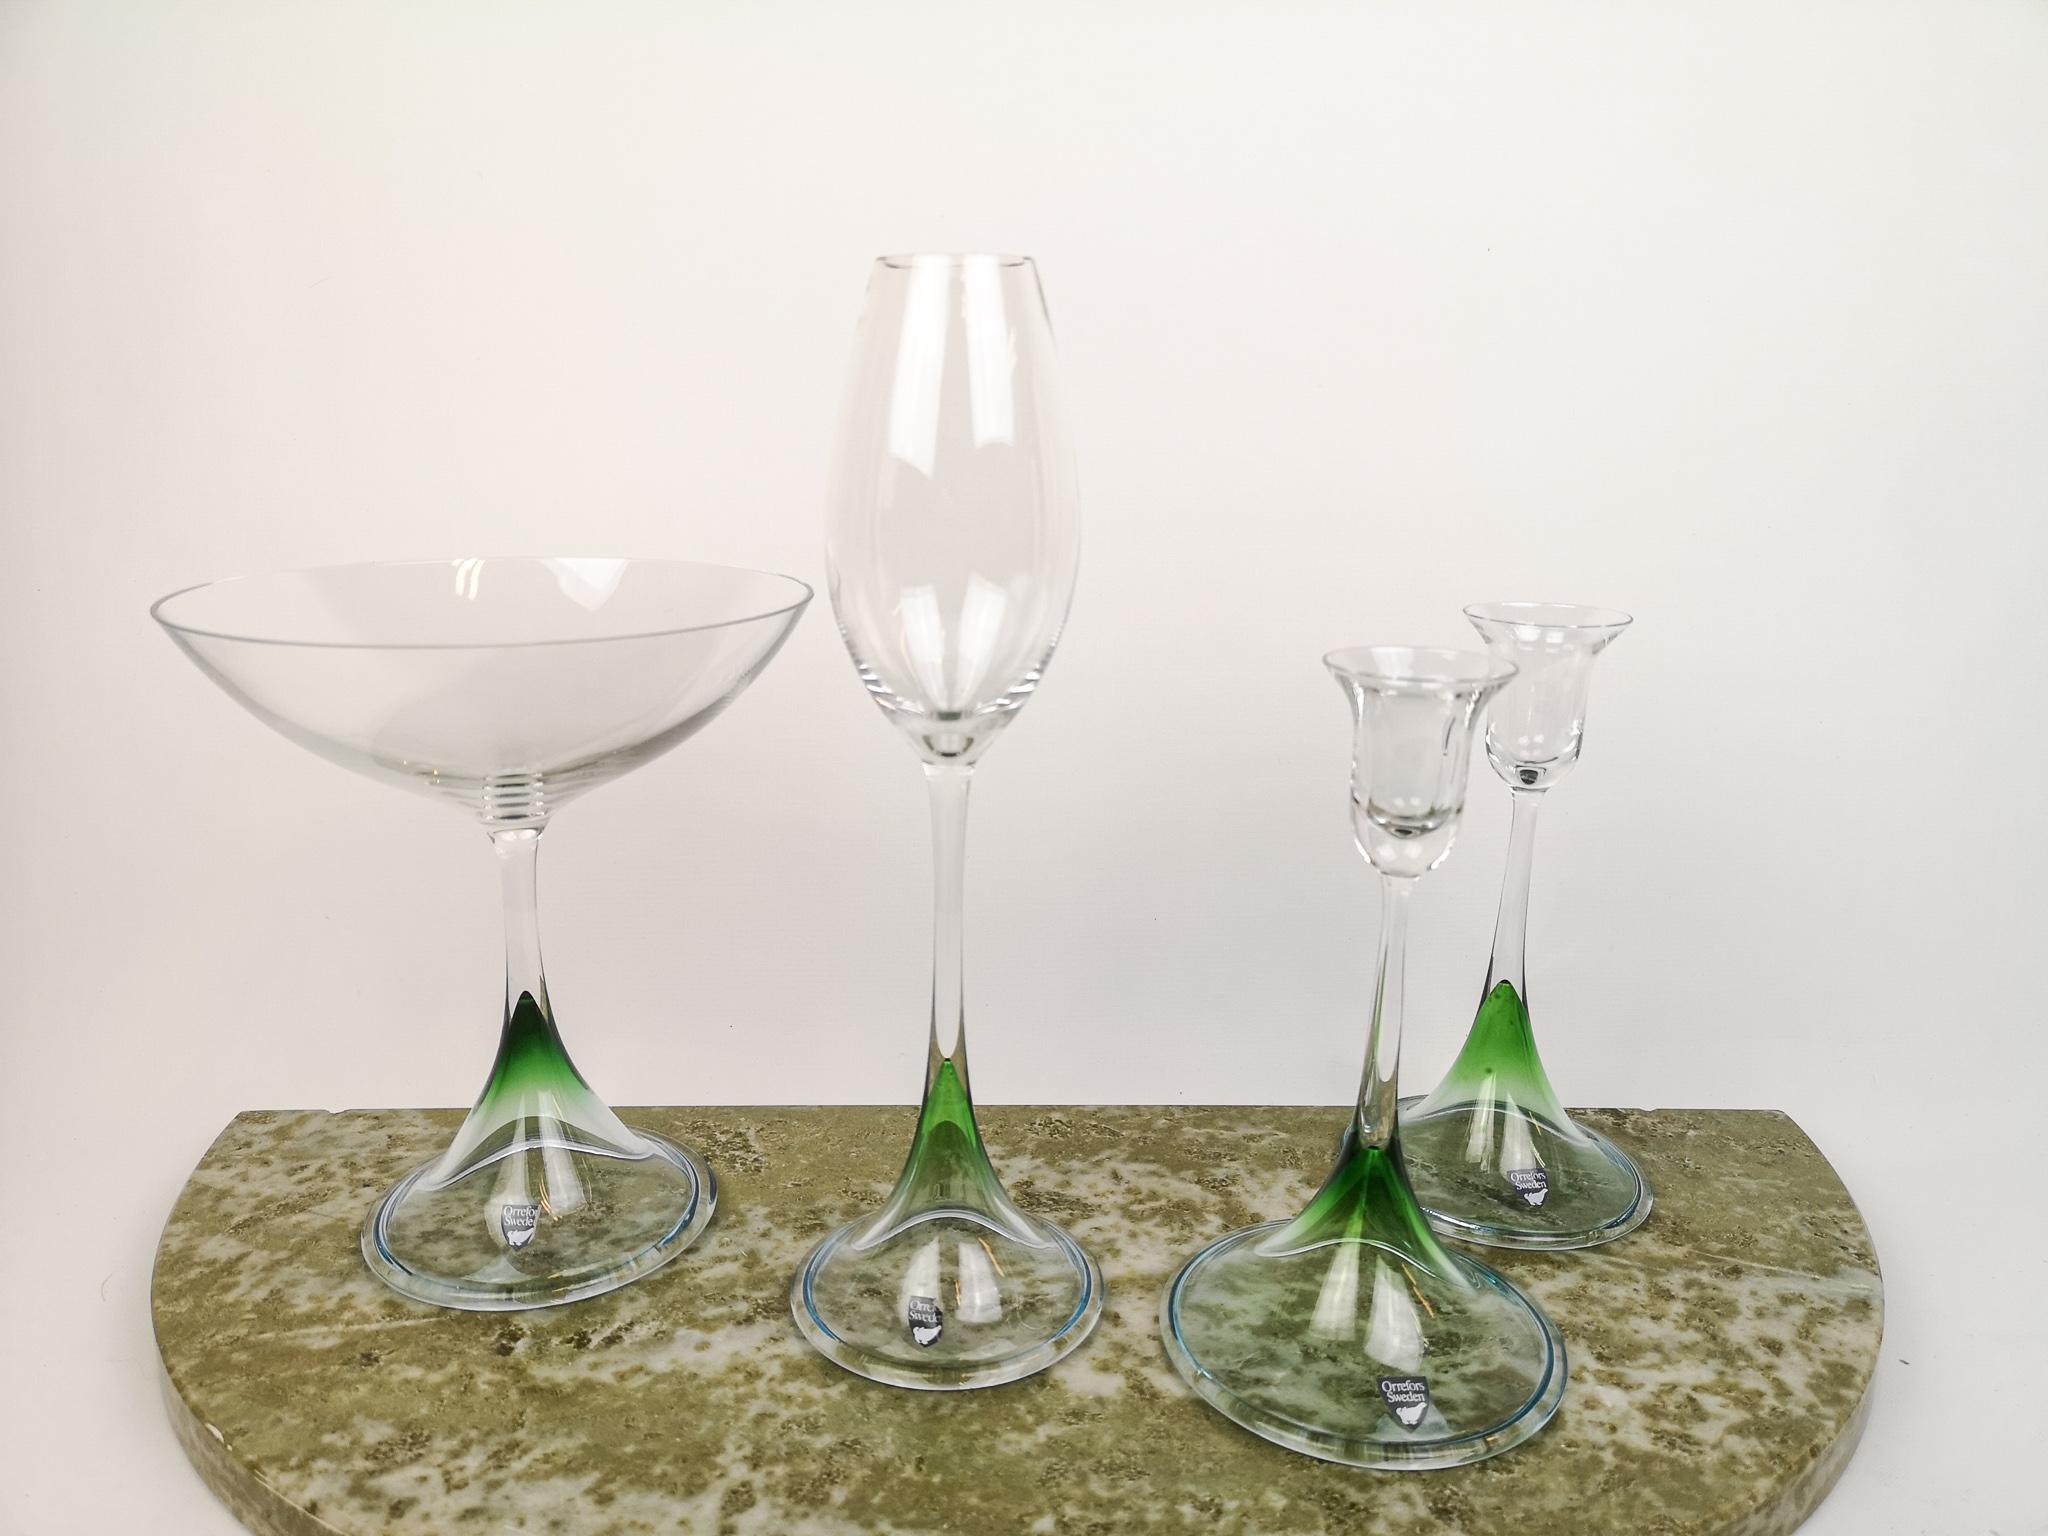 Wonderful pieces of tulip glasses in green clear glass design. Made by Orrefors in Sweden and design by Erika Lagerbielke.
There is a bowl on foot, a high tulip glass and two candlestick holders. The all match each other.

Very good condition and